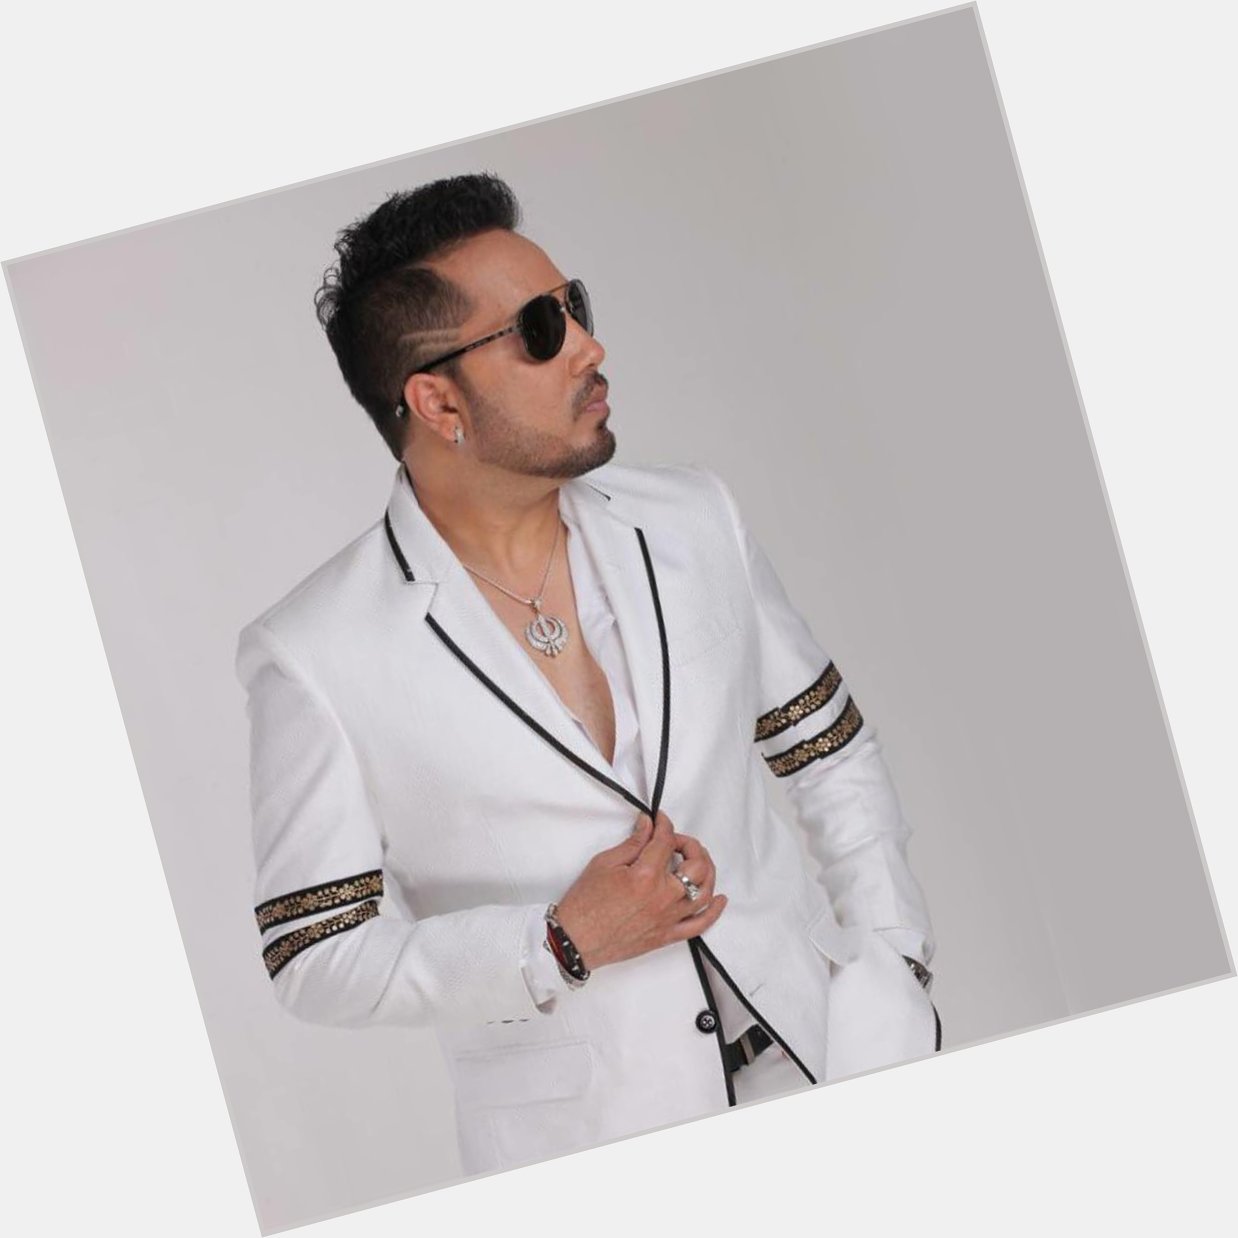 Wishing Rockstar Mika Singh  a very Happy Birthday , Keep Rocking as always and stay blessed.

- Team AIDC 